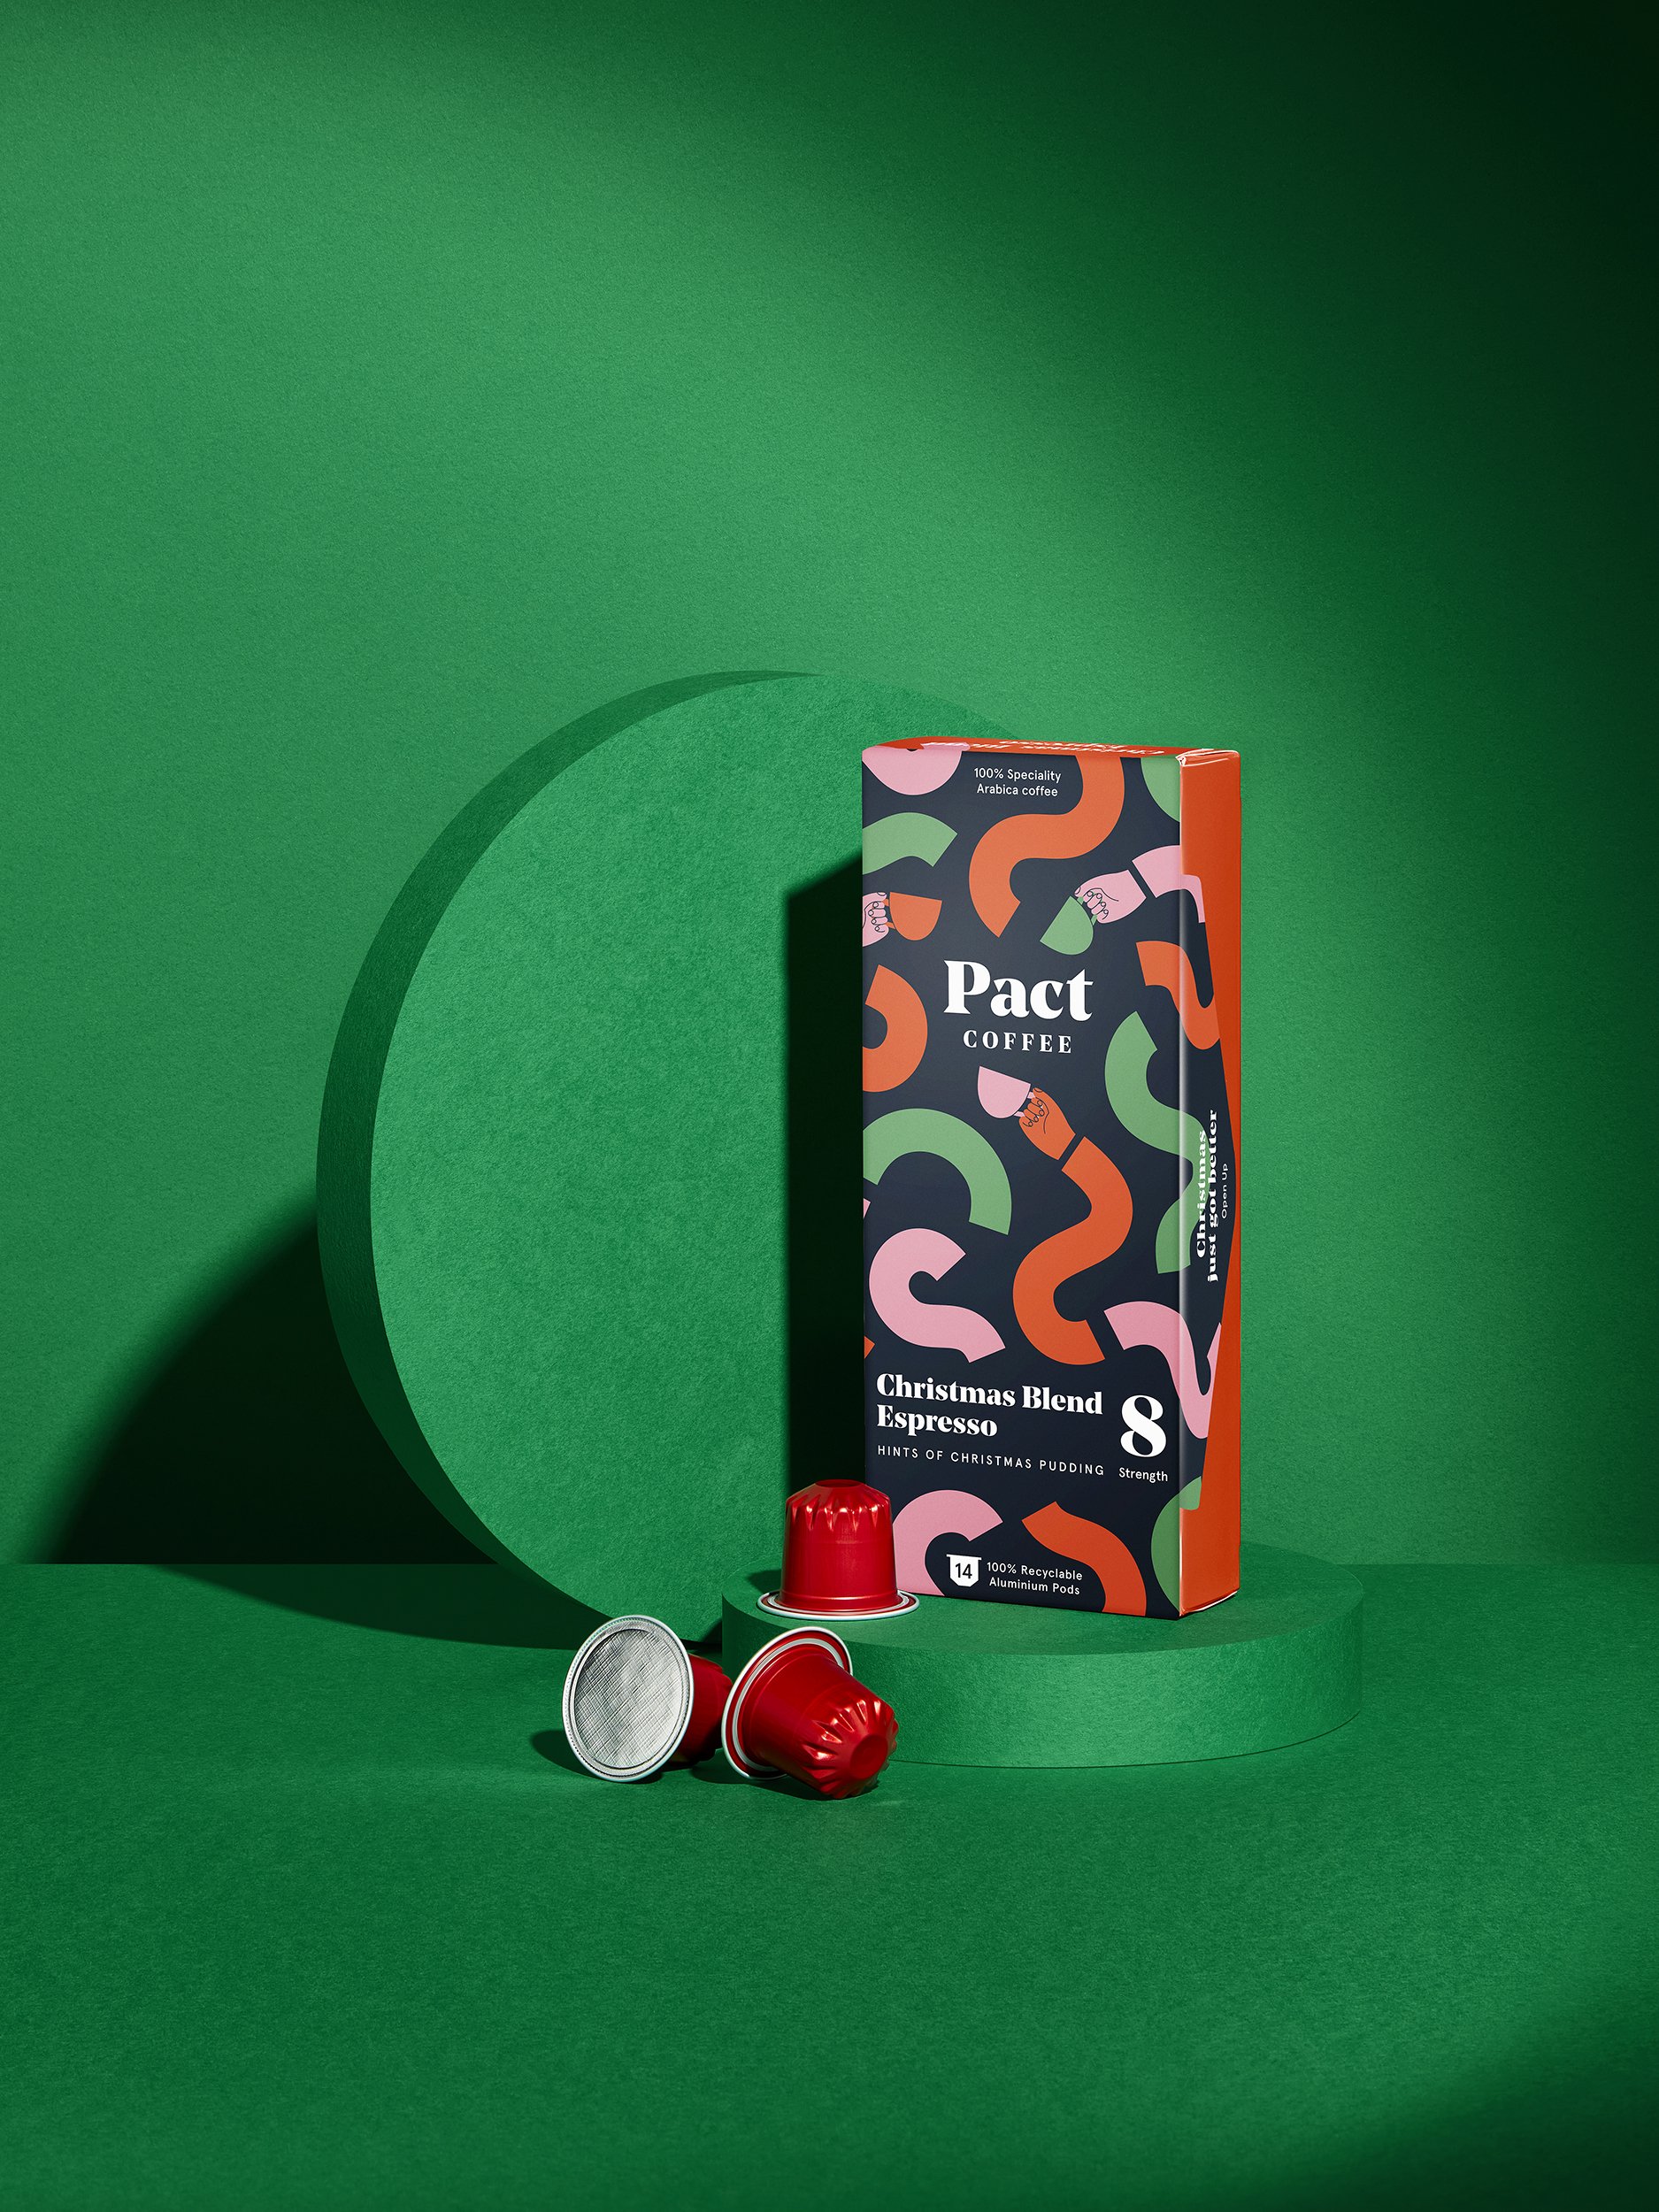 Pact coffee Christmas blend - creative product packshot photographer Simon Lyle Ritchie